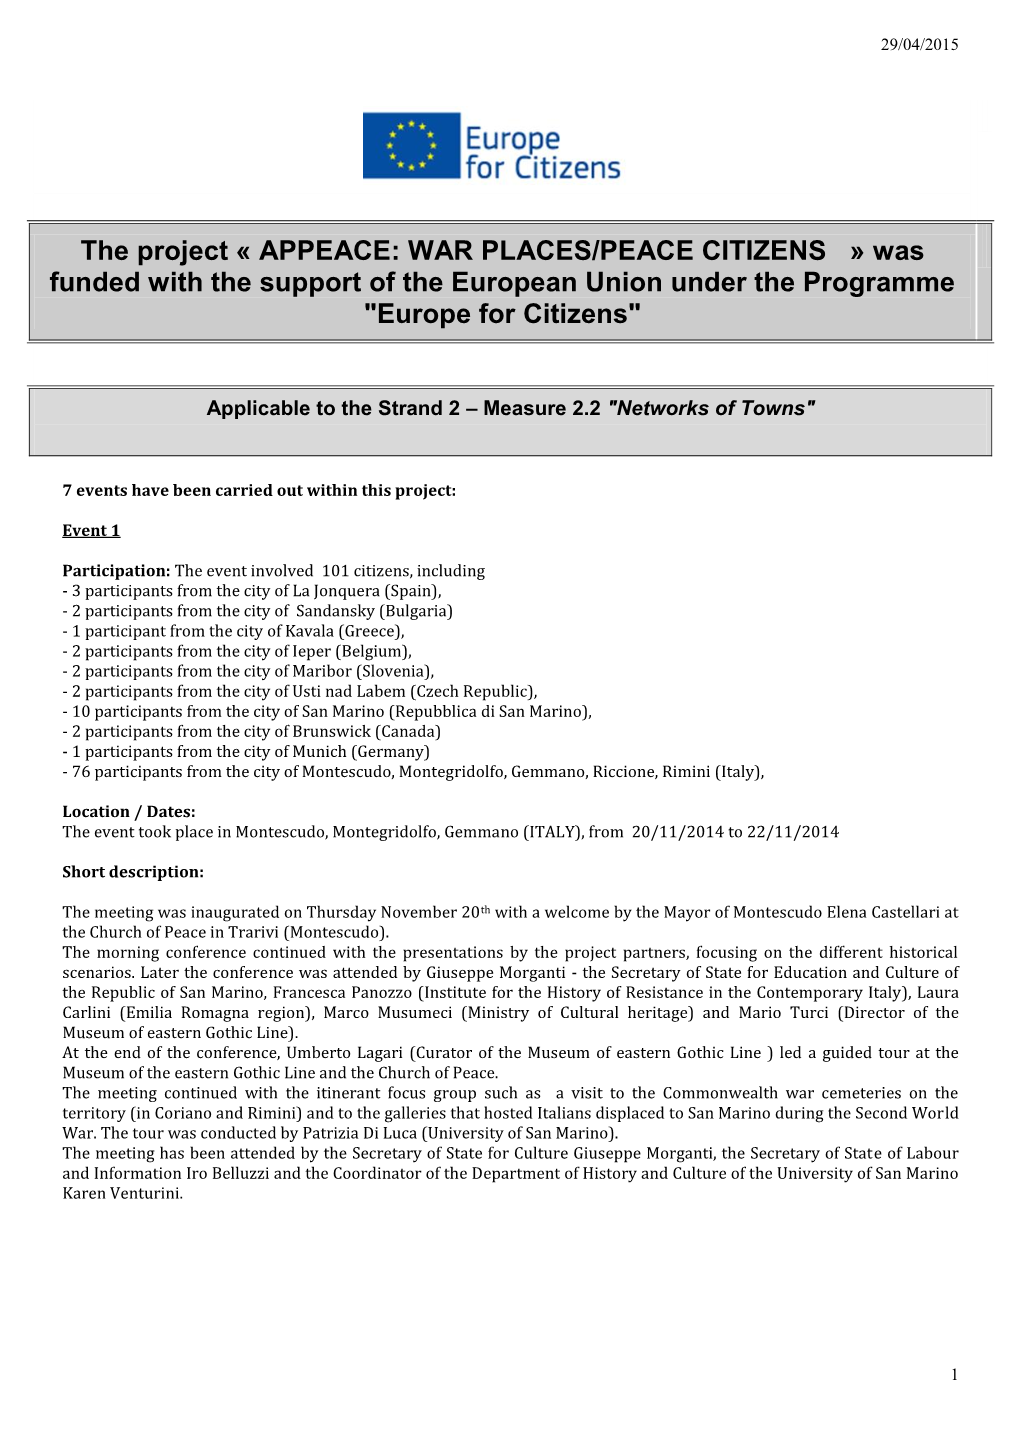 APPEACE: WAR PLACES/PEACE CITIZENS » Was Funded with the Support of the European Union Under the Programme "Europe for Citizens"